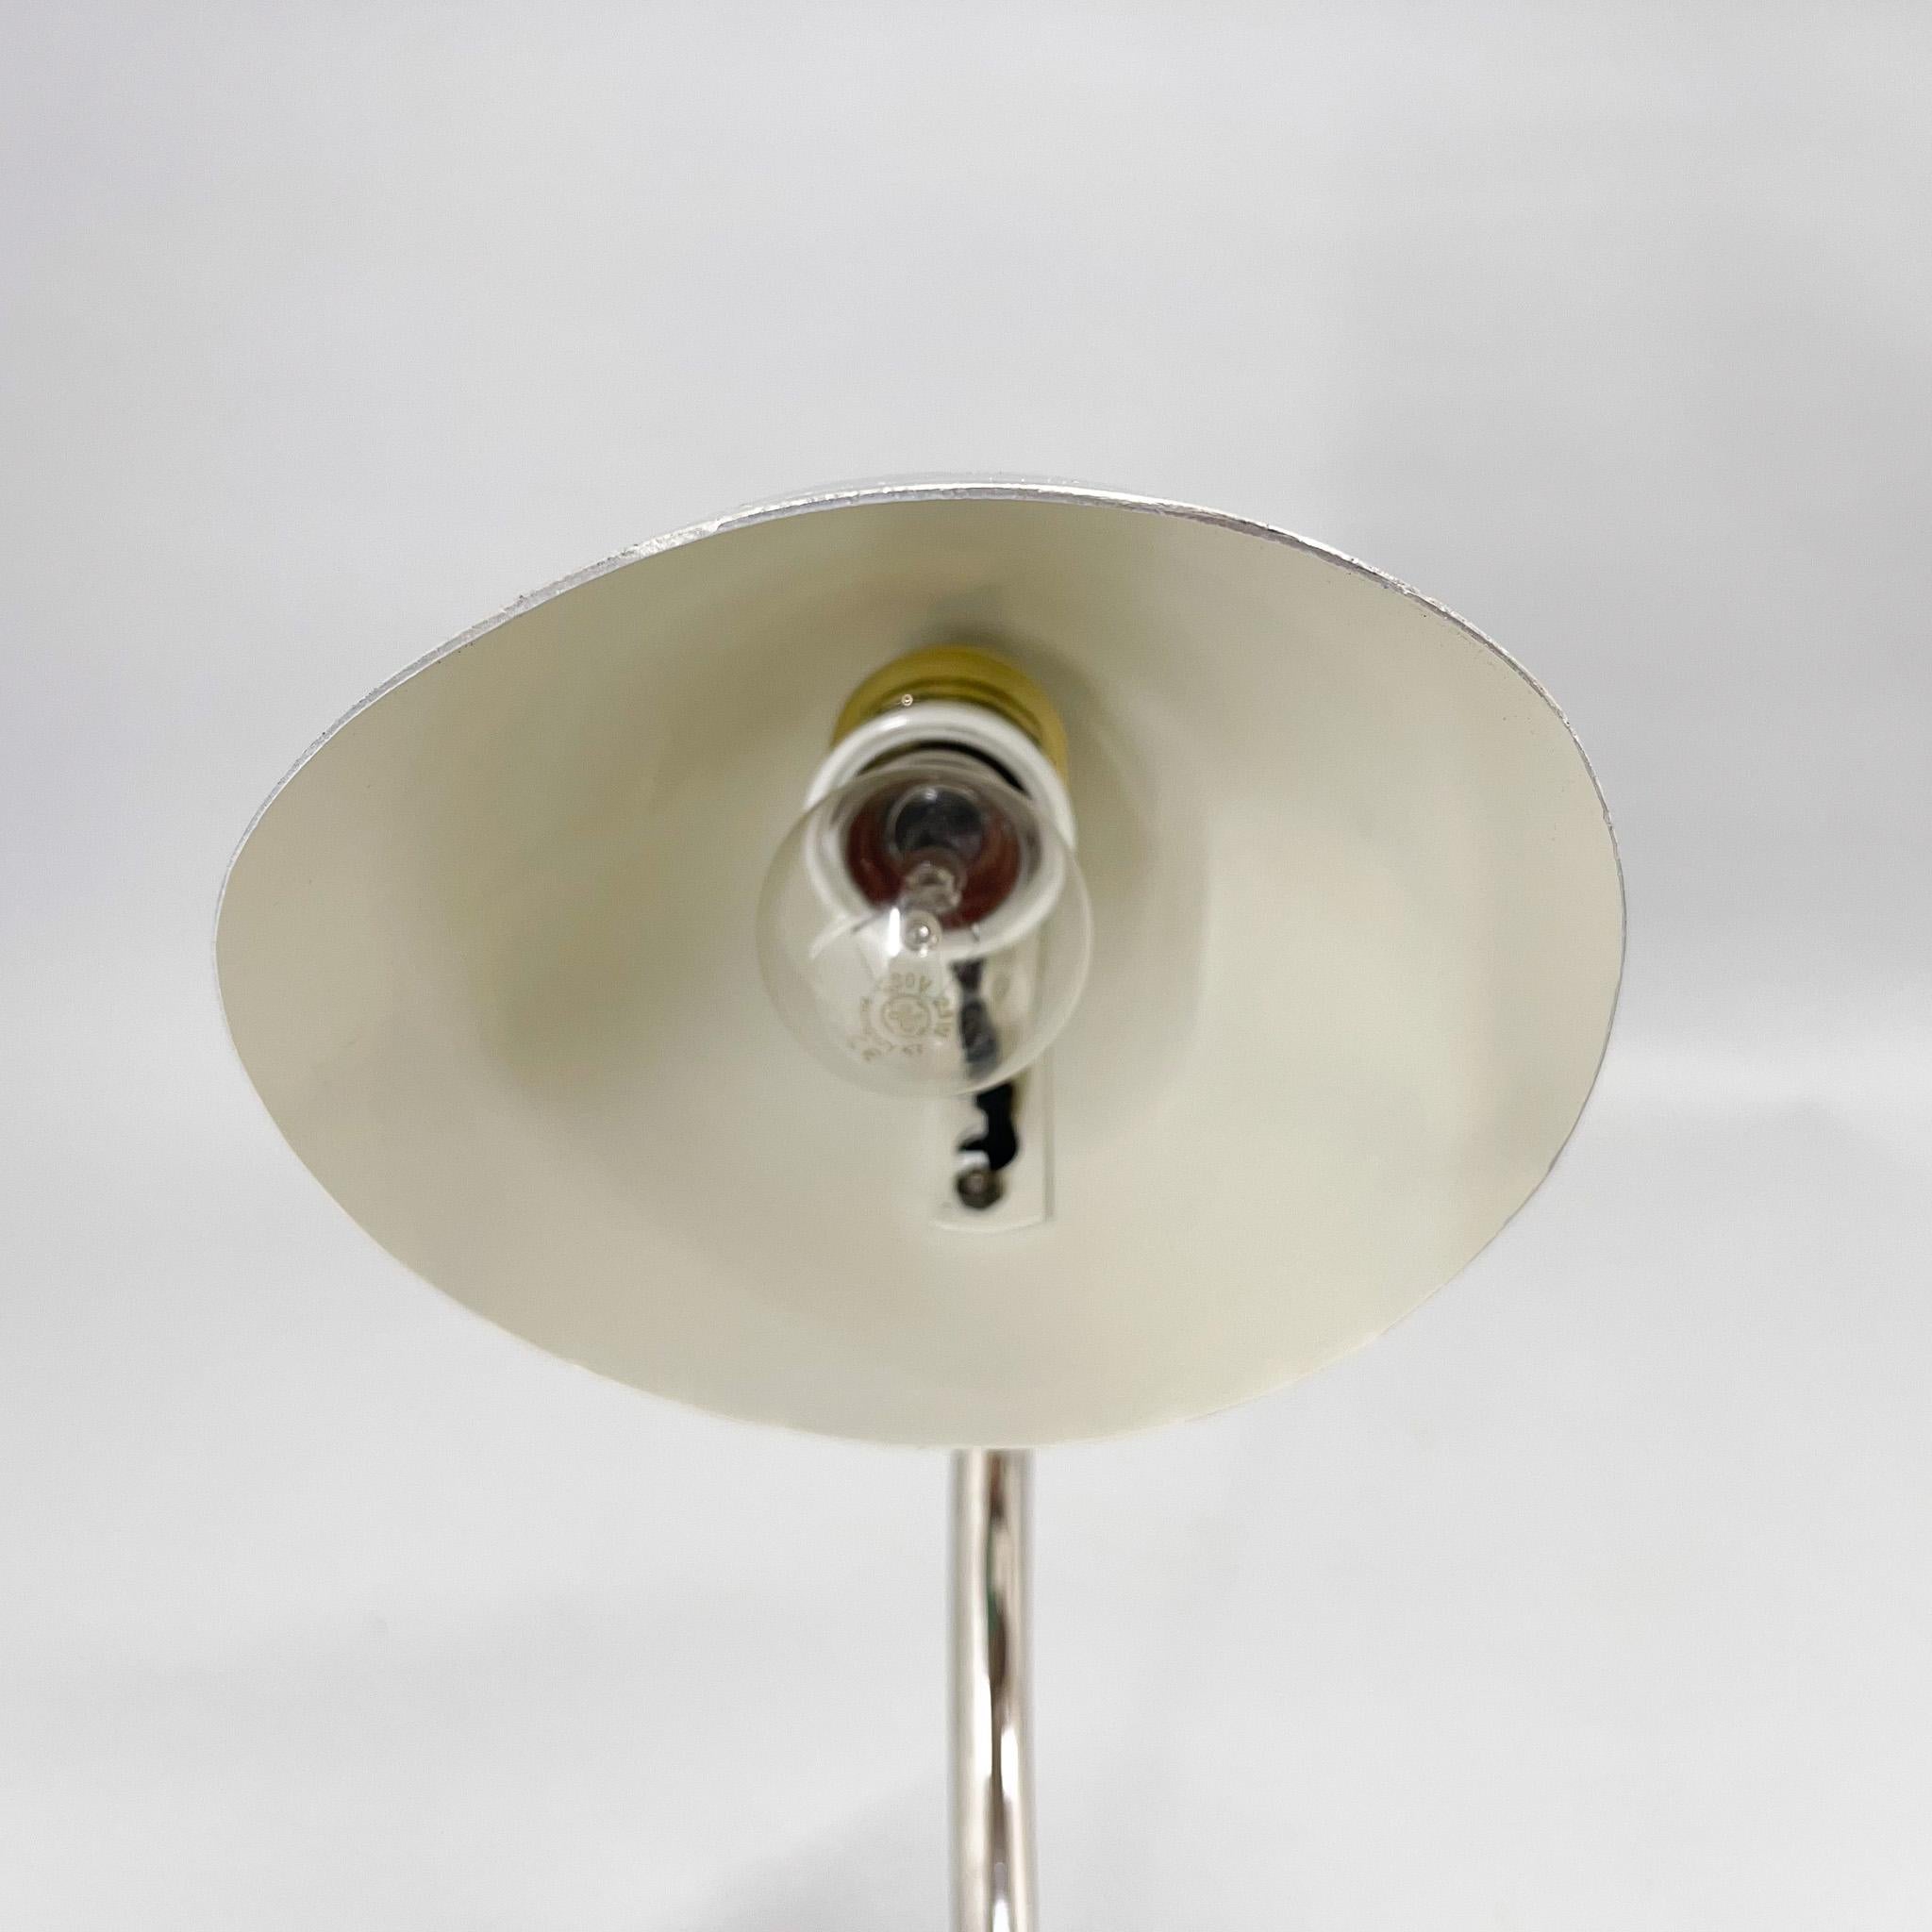 Functionalist / Bauhaus Flexible Table Lamp by Franta Anyz, 1930s For Sale 3